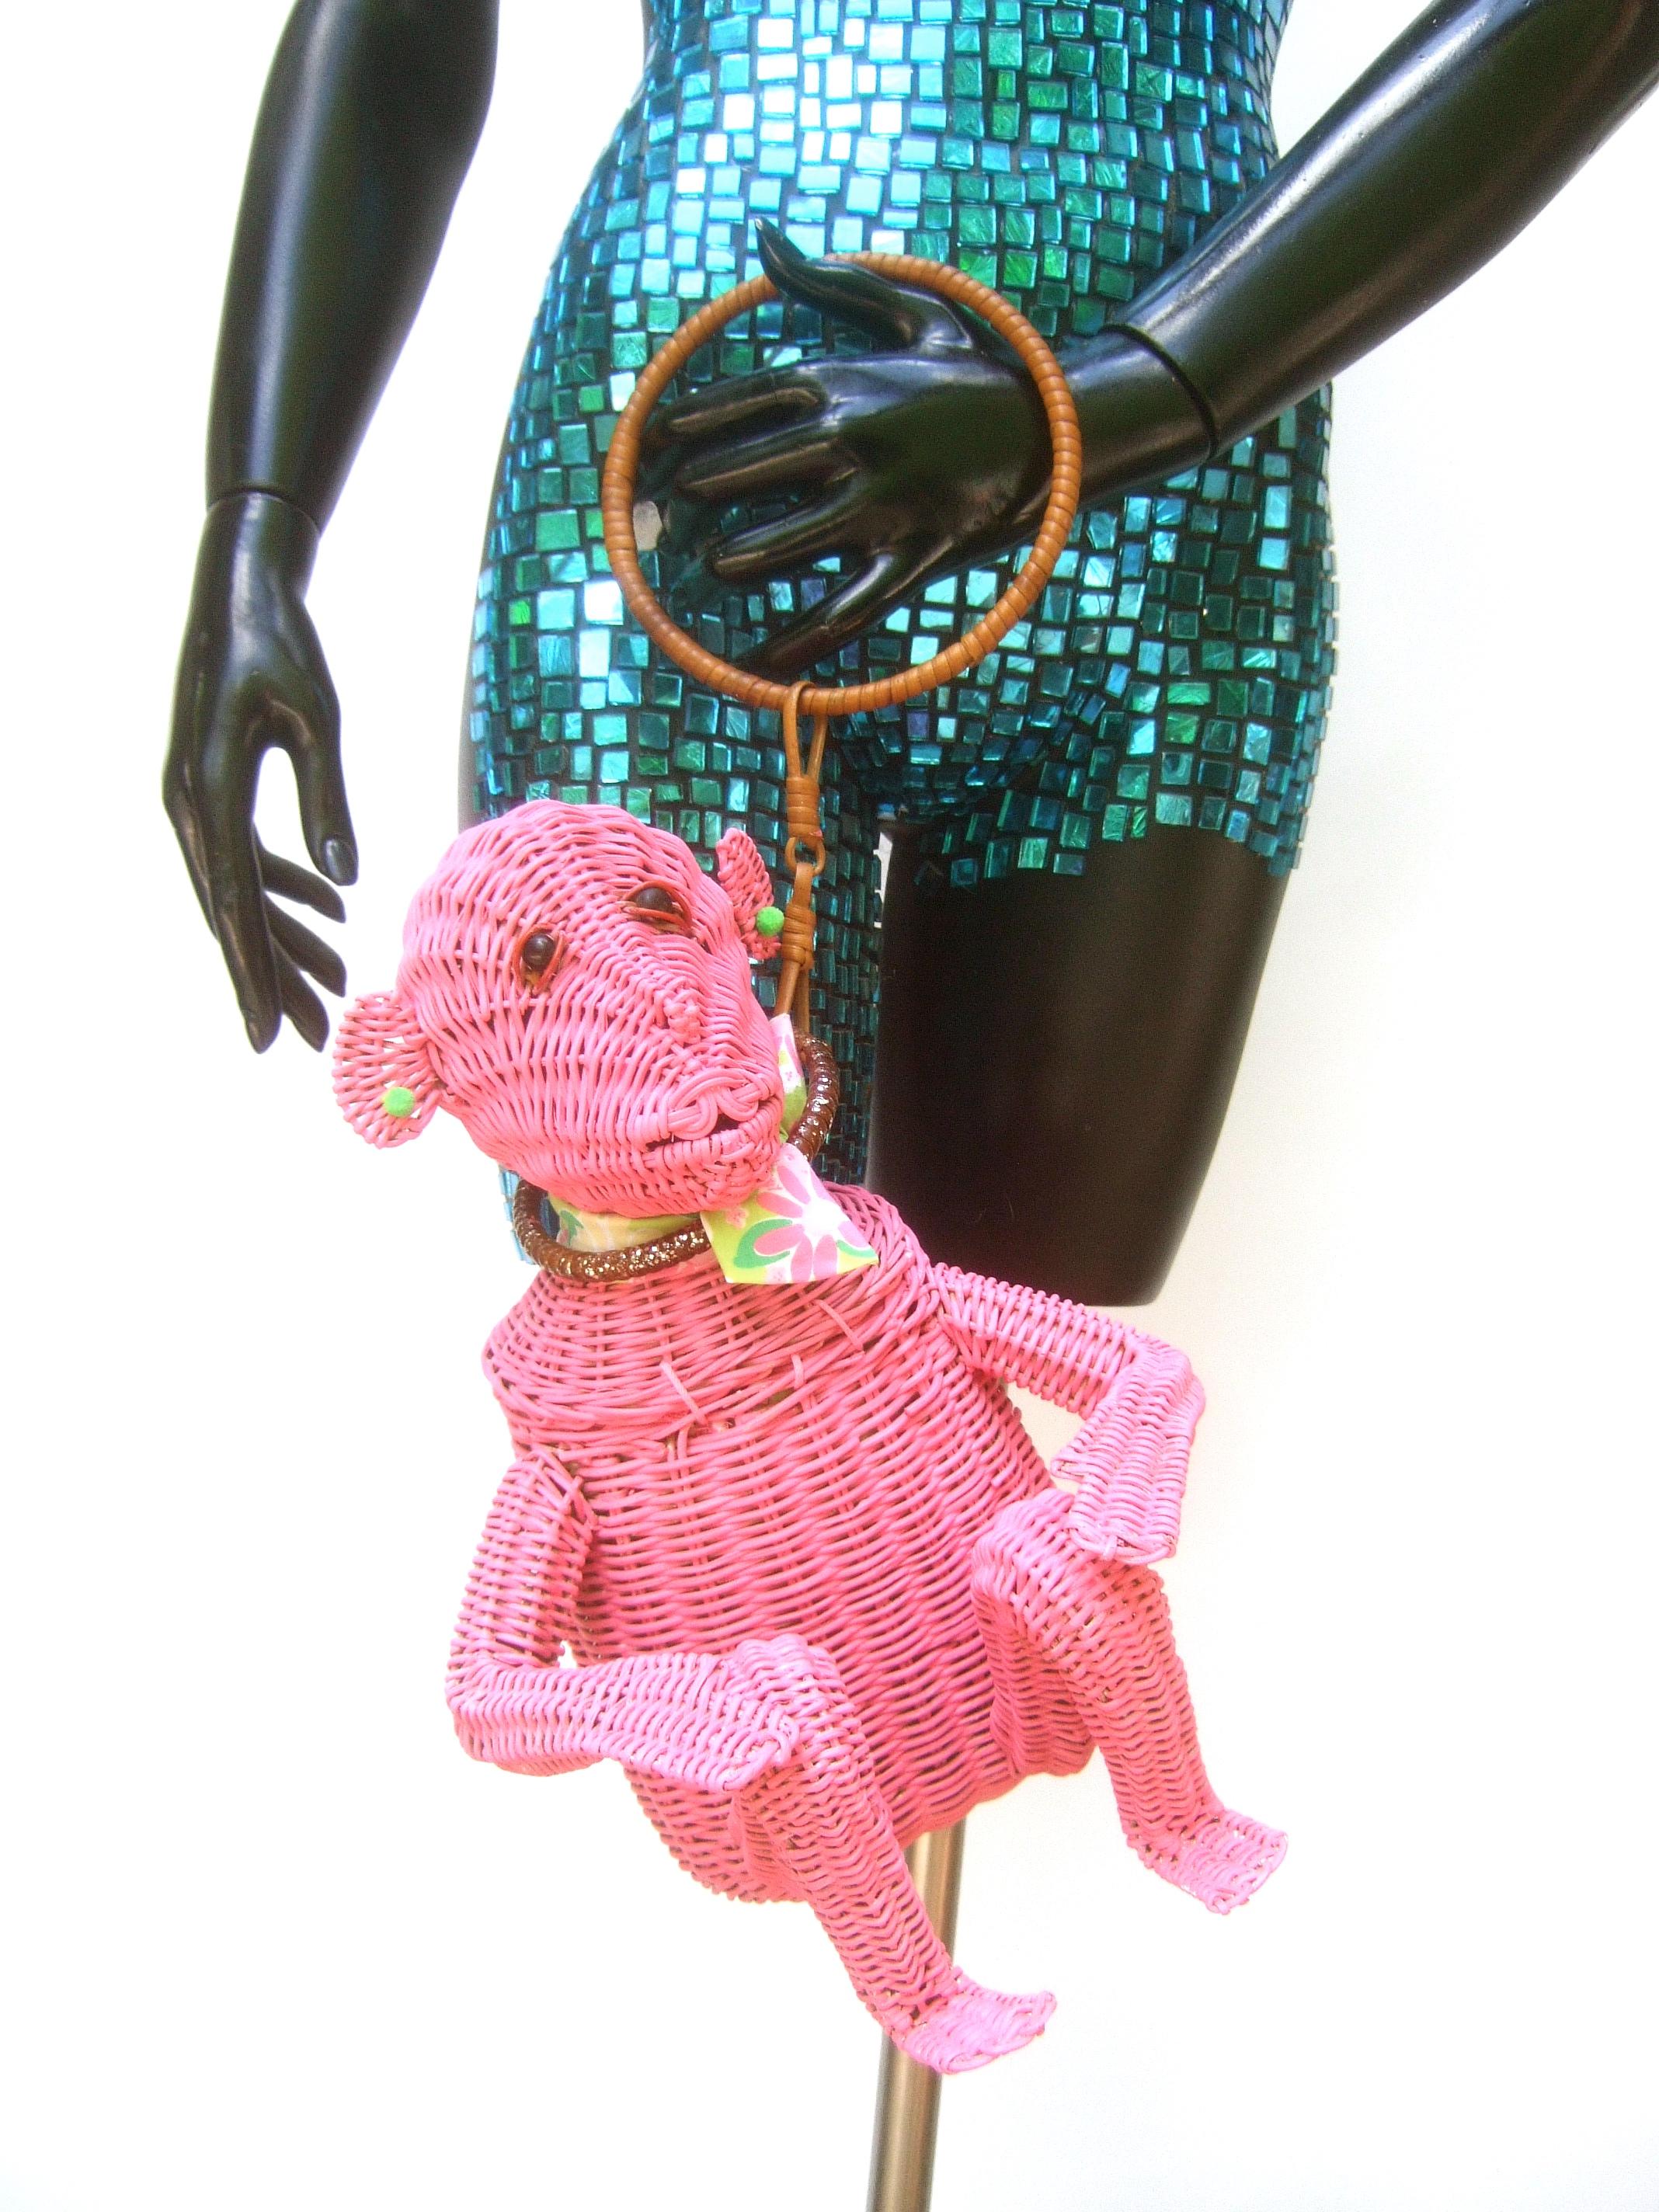 Whimsical Vintage Wicker Monkey Handbag With Lilly Pulitzer Fabric c 1950's  2